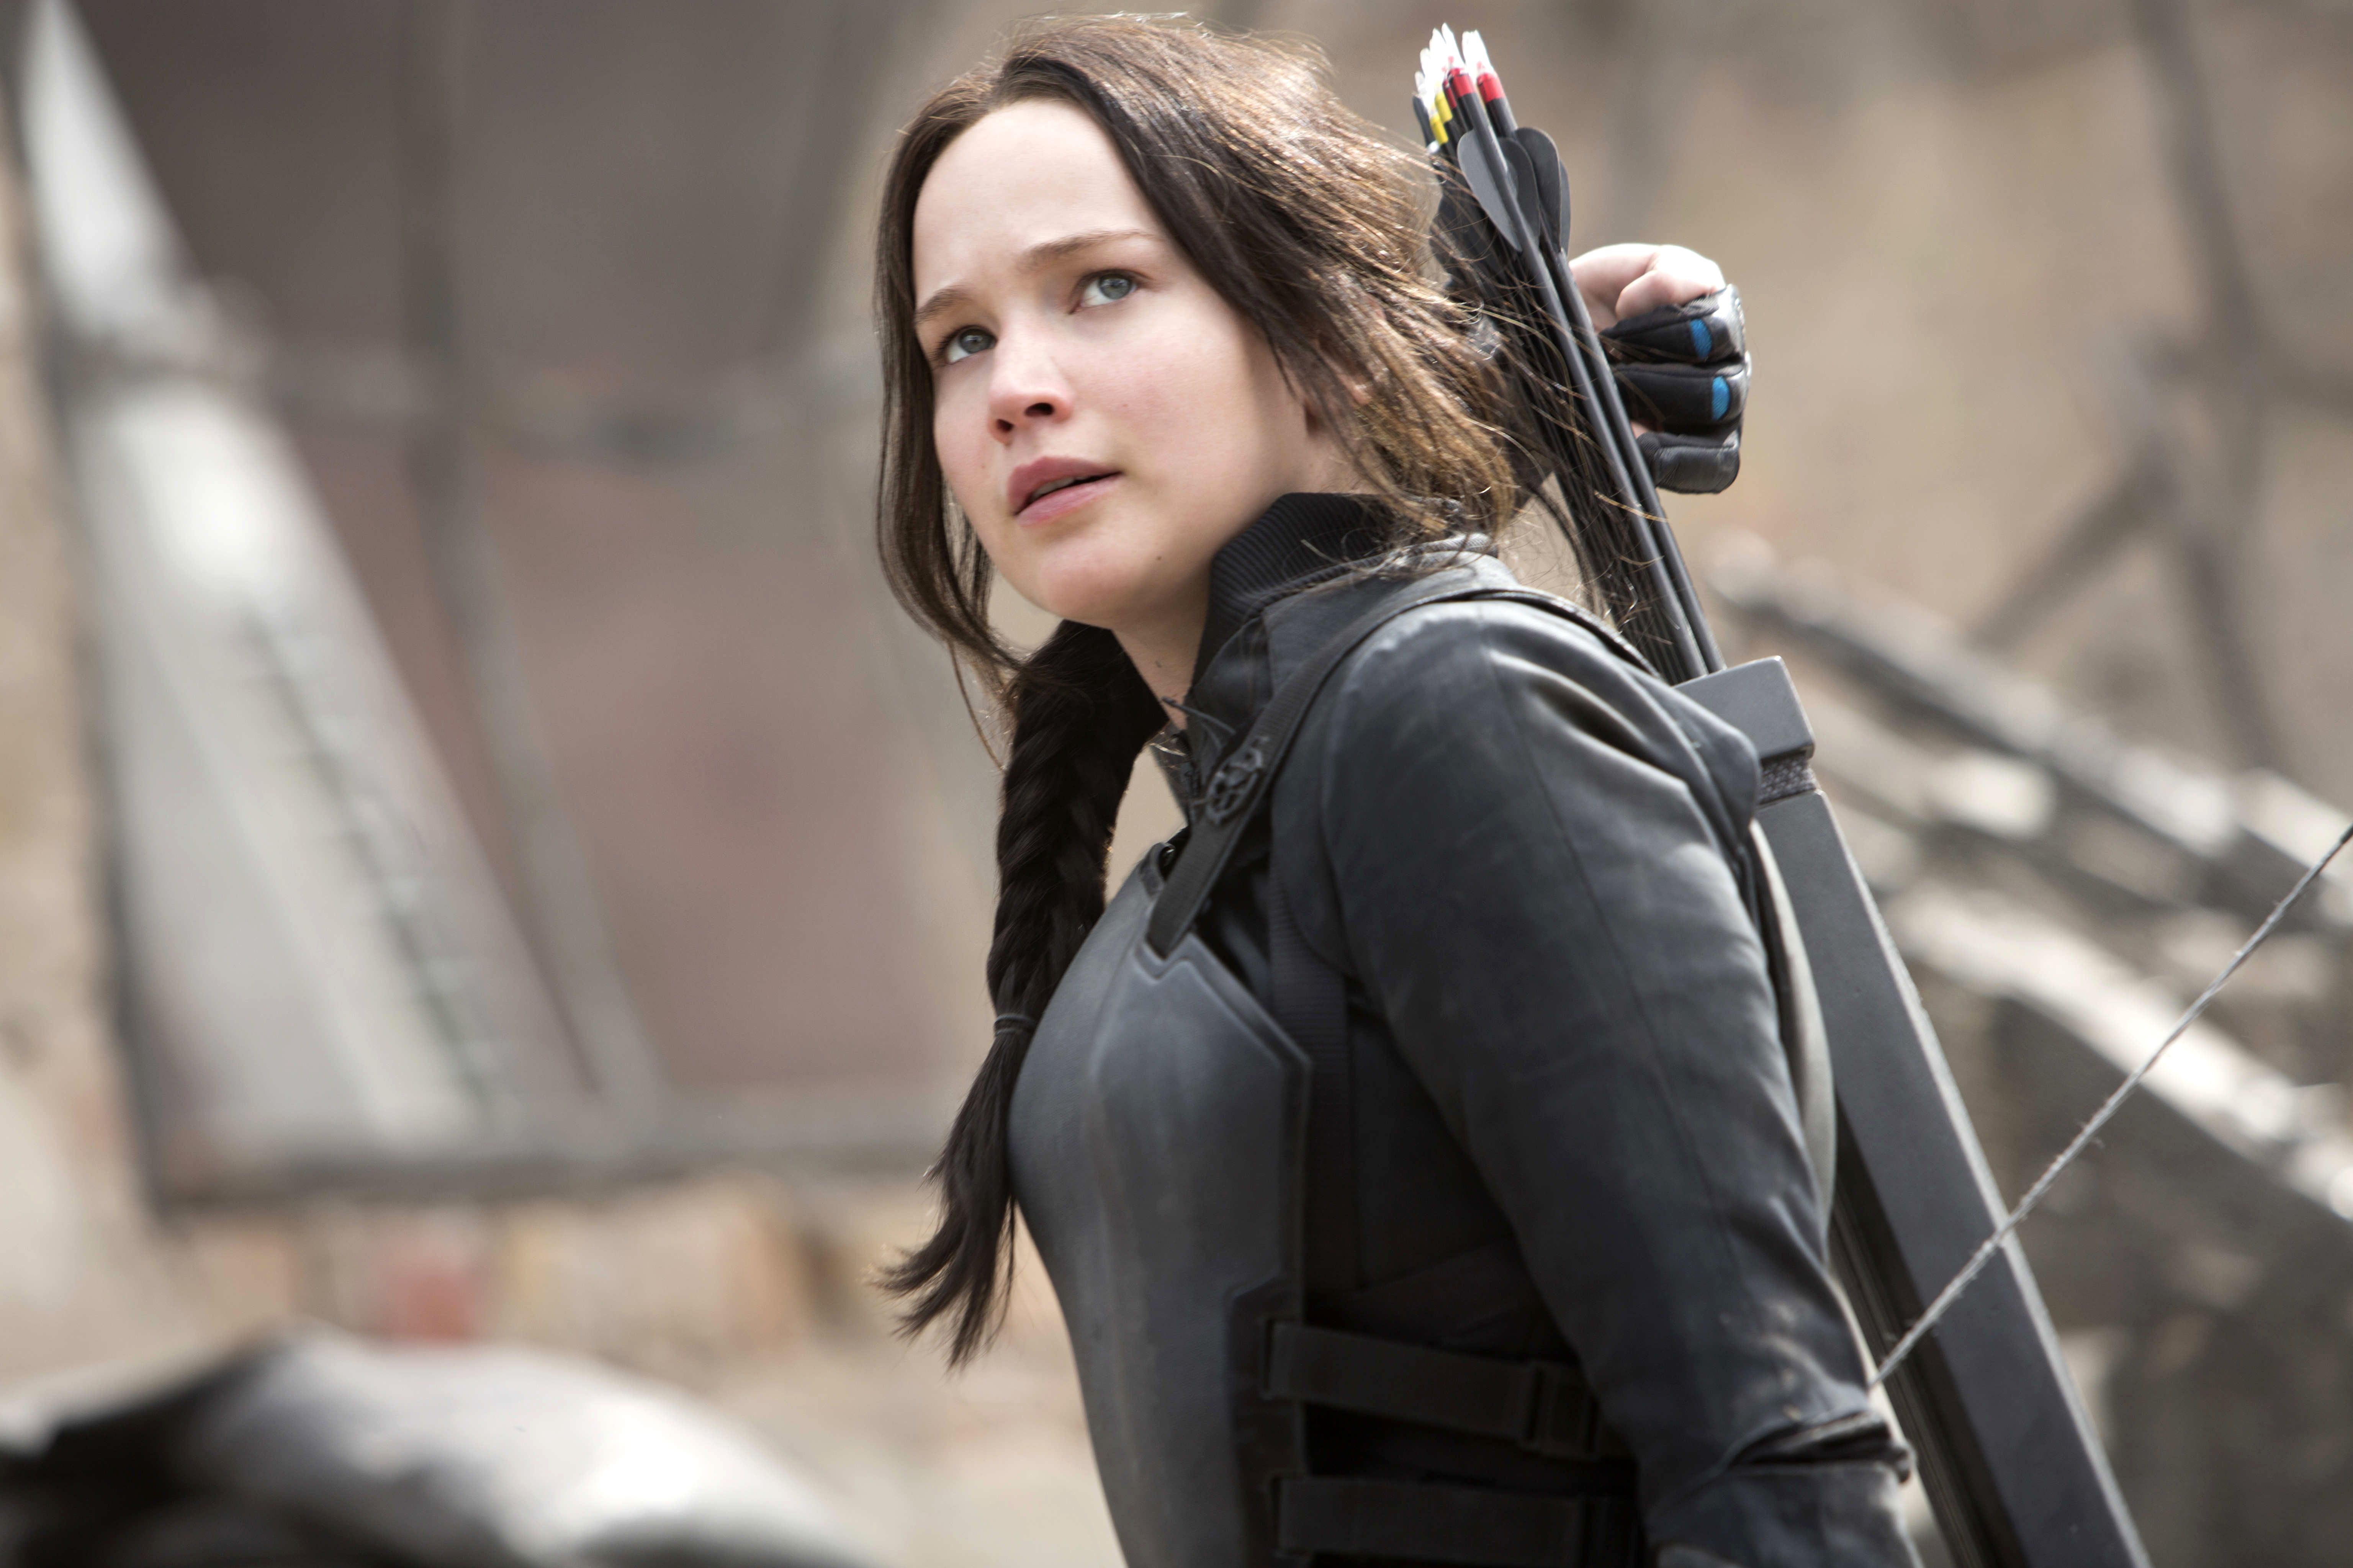 Jennifer Lawrence as Katniss Everdeen in The Hunger Games: Mockingjay Part 1. She's wearing a black leather outfit and carrying a bow and arrow over her shoulder. - Jennifer Lawrence